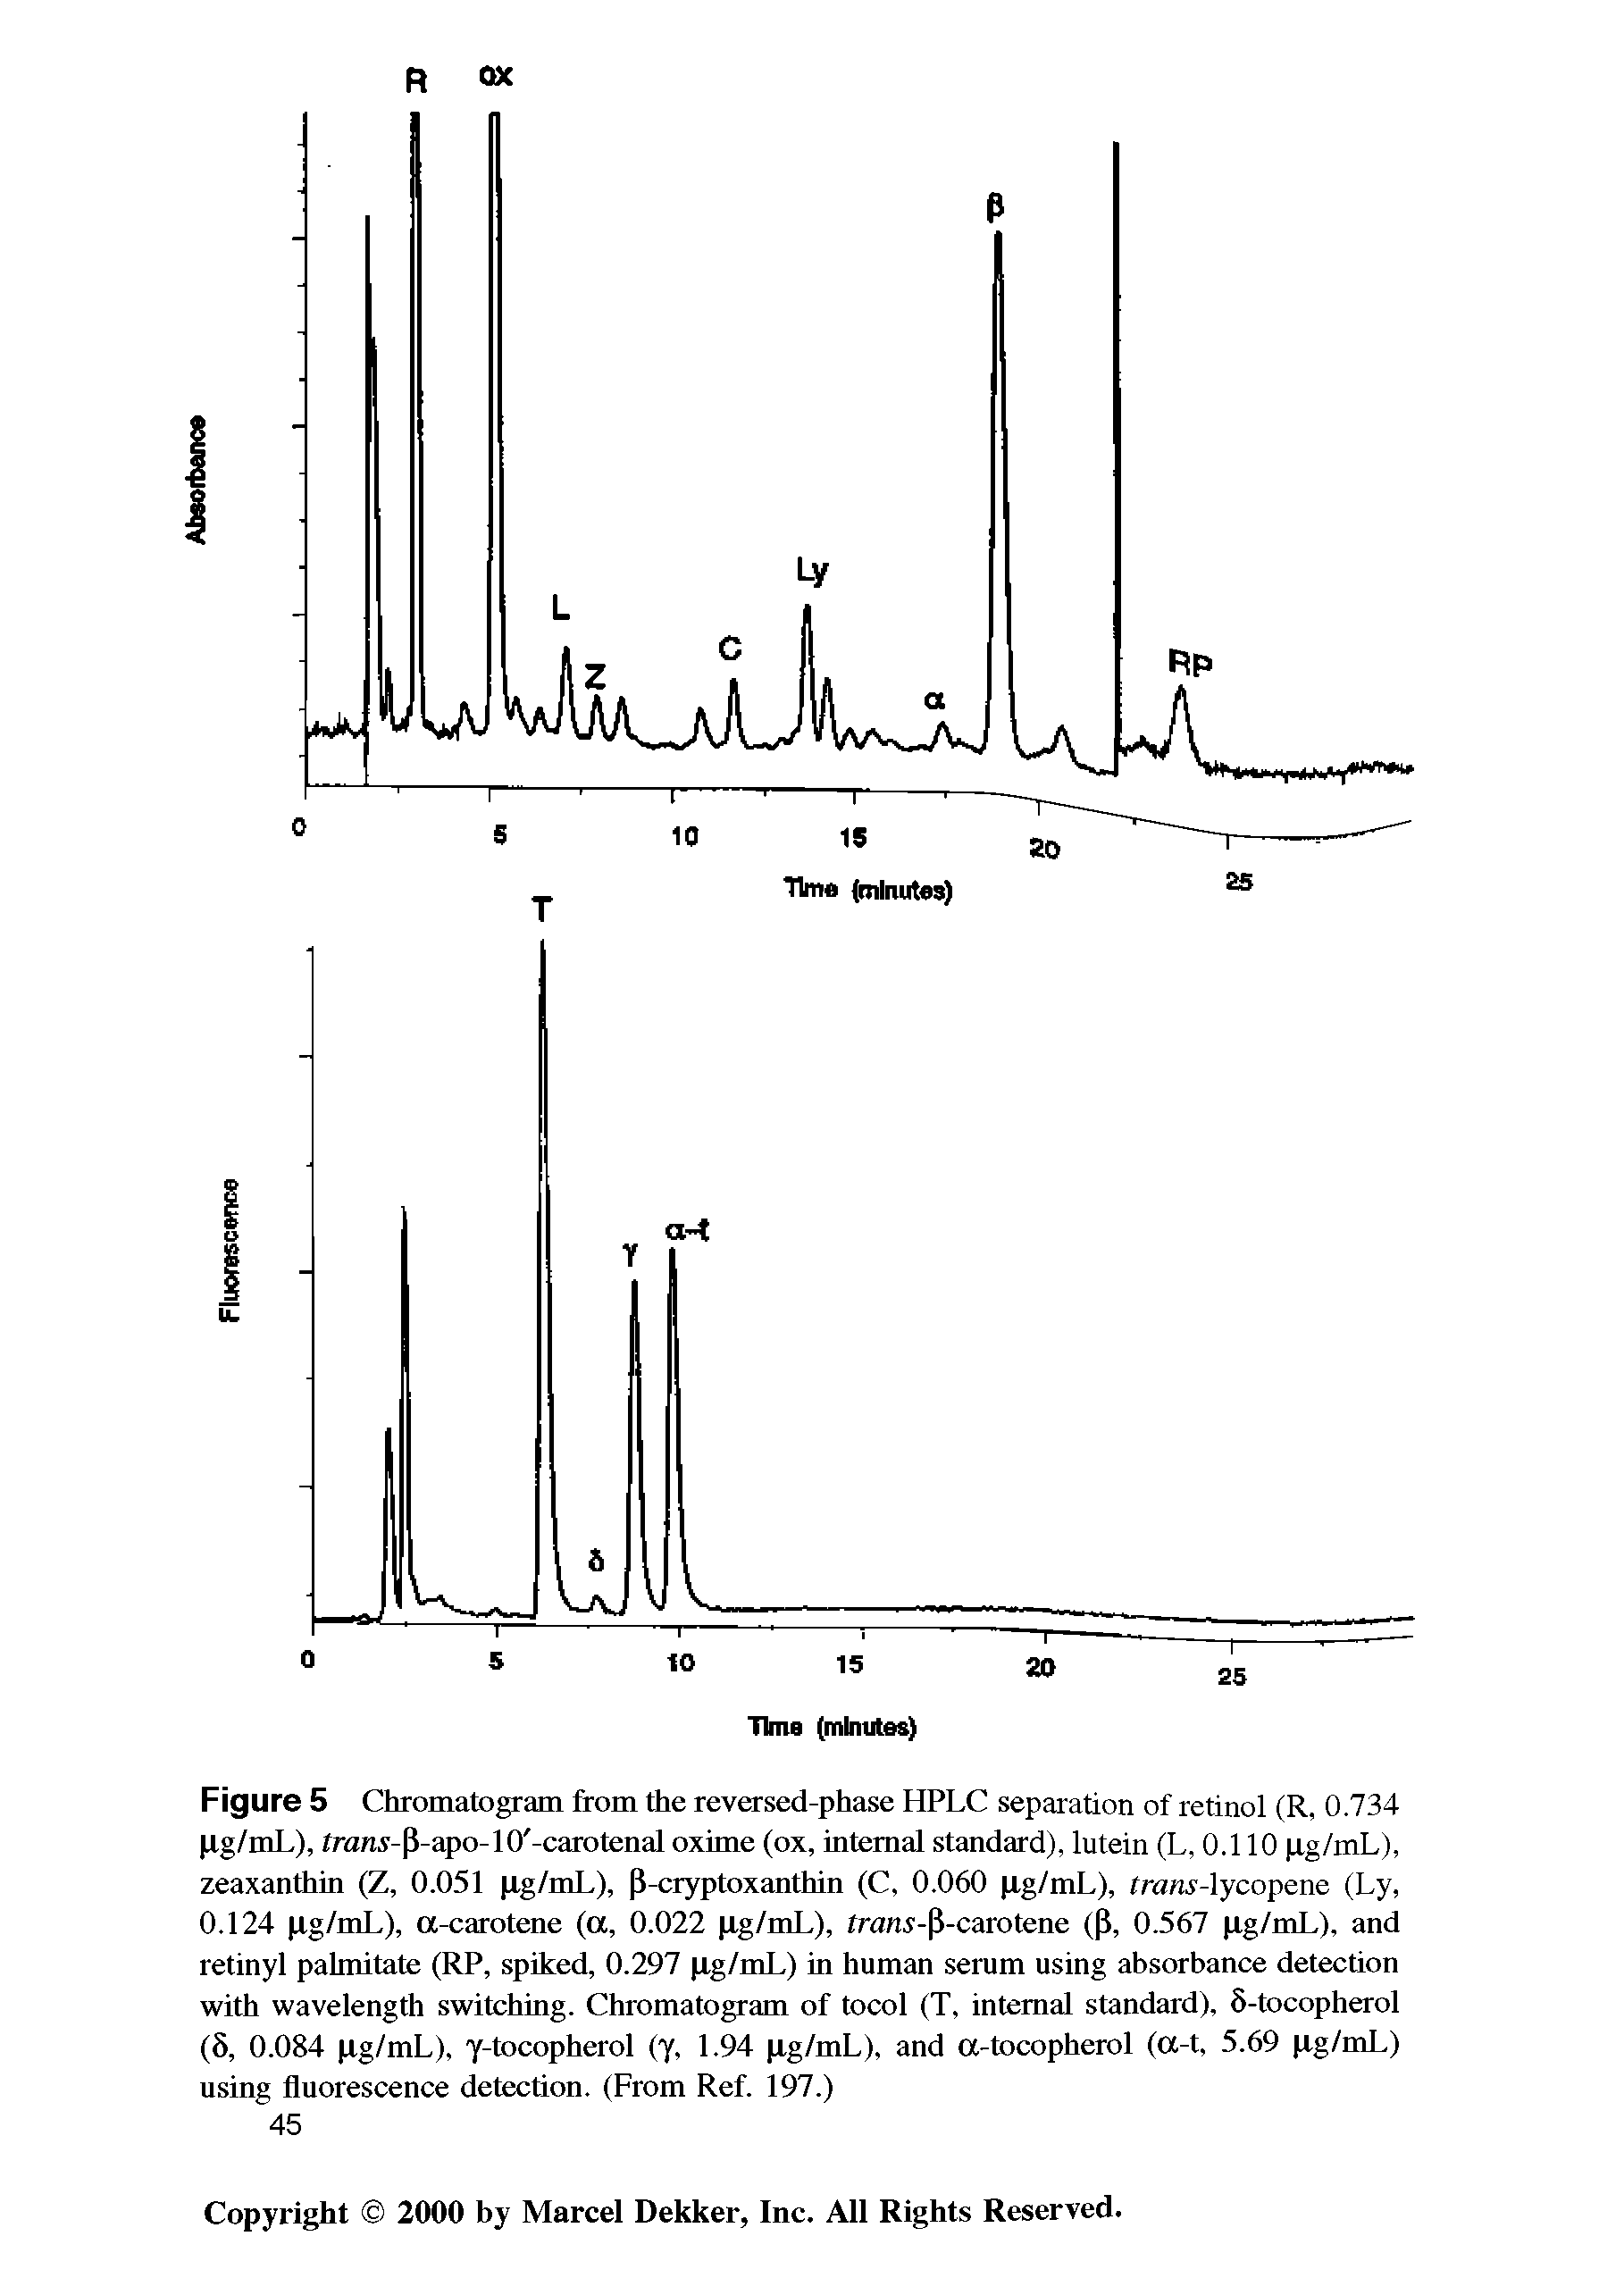 Figure 5 Chromatogram from the reversed-phase HPLC separation of retinol (R, 0.734 pg/mL), frans-P-apo-lO -carotenal oxime (ox, internal standard), lutein (L, 0.110 pg/mL), zeaxanthin (Z, 0.051 pg/mL), P-cryptoxanthin (C, 0.060 pg/mL), tratw-lycopene (Ly, 0.124 pg/mL), a-carotene (a, 0.022 pg/mL), fran -P-carotene (P, 0.567 pg/mL), and retinyl palmitate (RP, spiked, 0.297 pg/mL) in human serum using absorbance detection with wavelength switching. Chromatogram of tocol (T, internal standard), S-tocopherol (5, 0.084 pg/mL), y-tocopherol (y, 1.94 pg/mL), and a-tocopherol (a-t, 5.69 pg/mL) using fluorescence detection. (From Ref. 197.)...